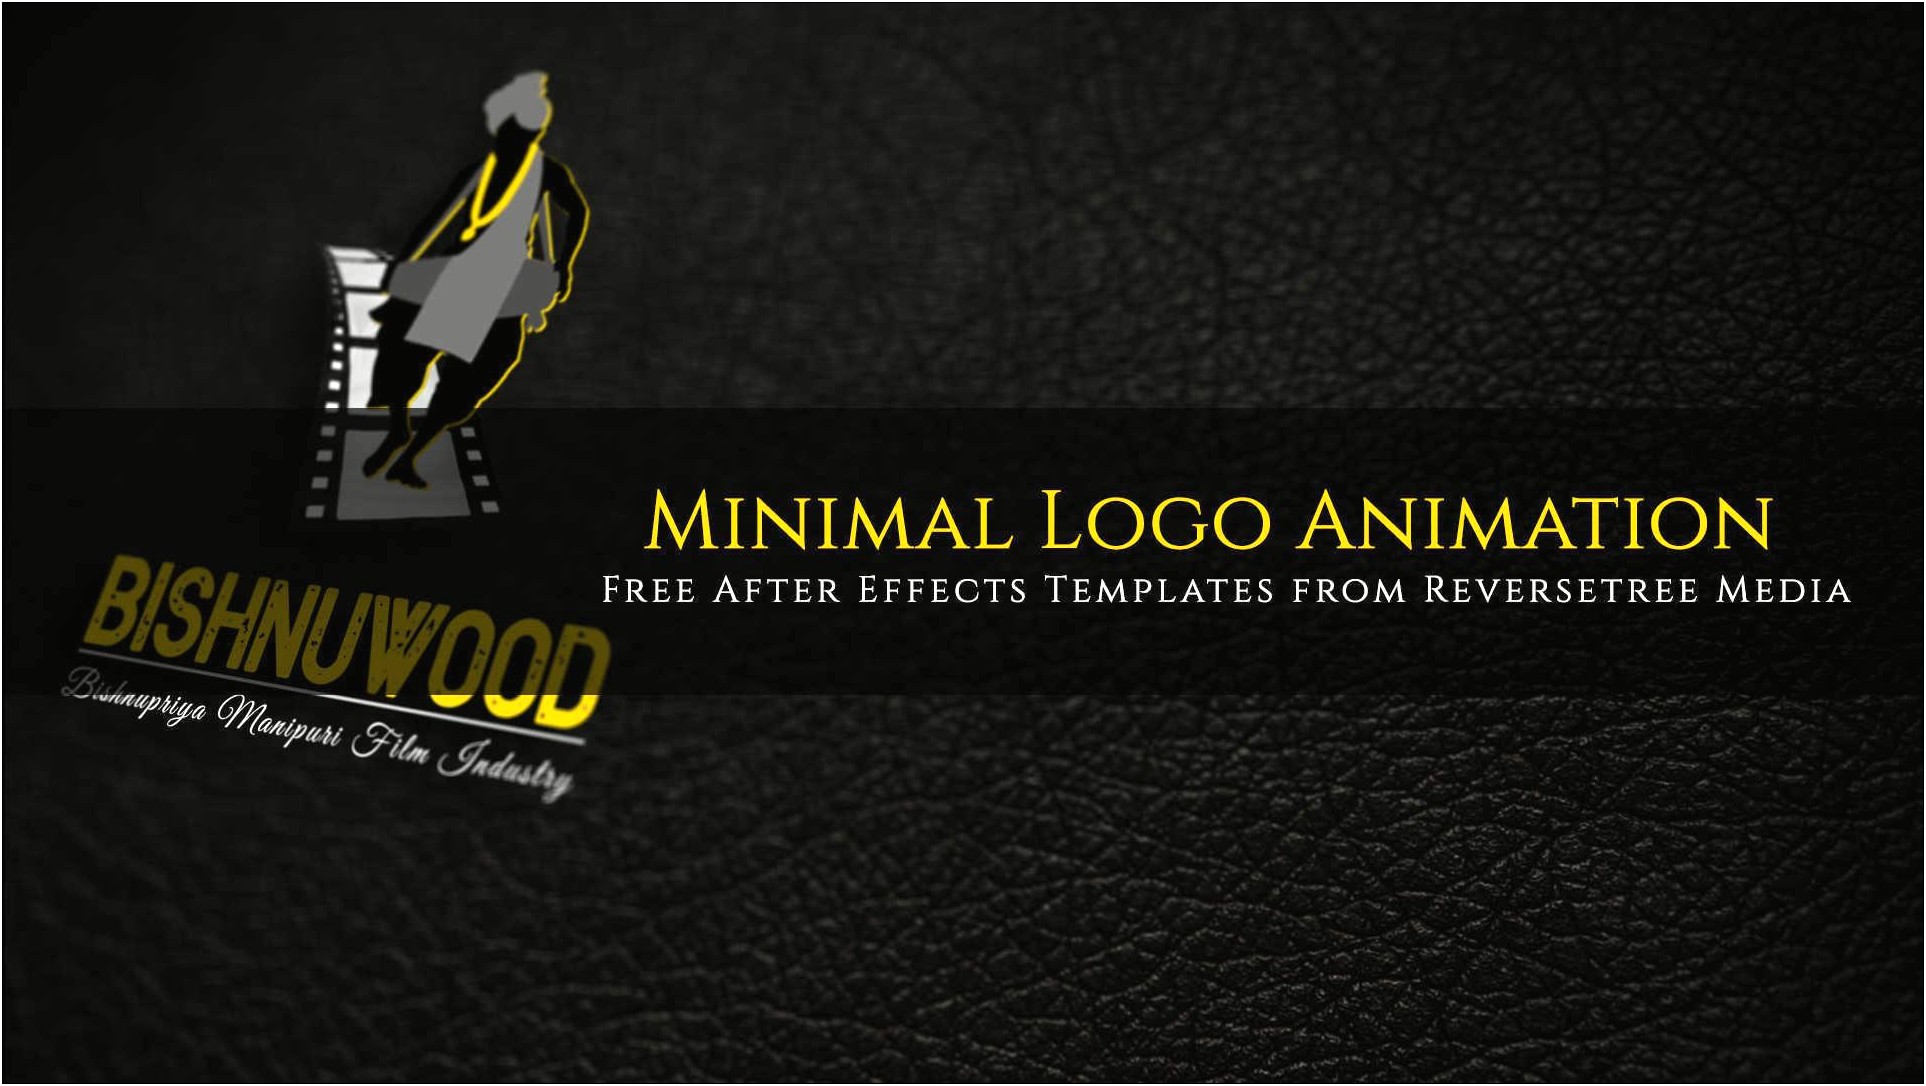 free-logo-reveal-template-after-effects-templates-resume-designs-35v25yg14o